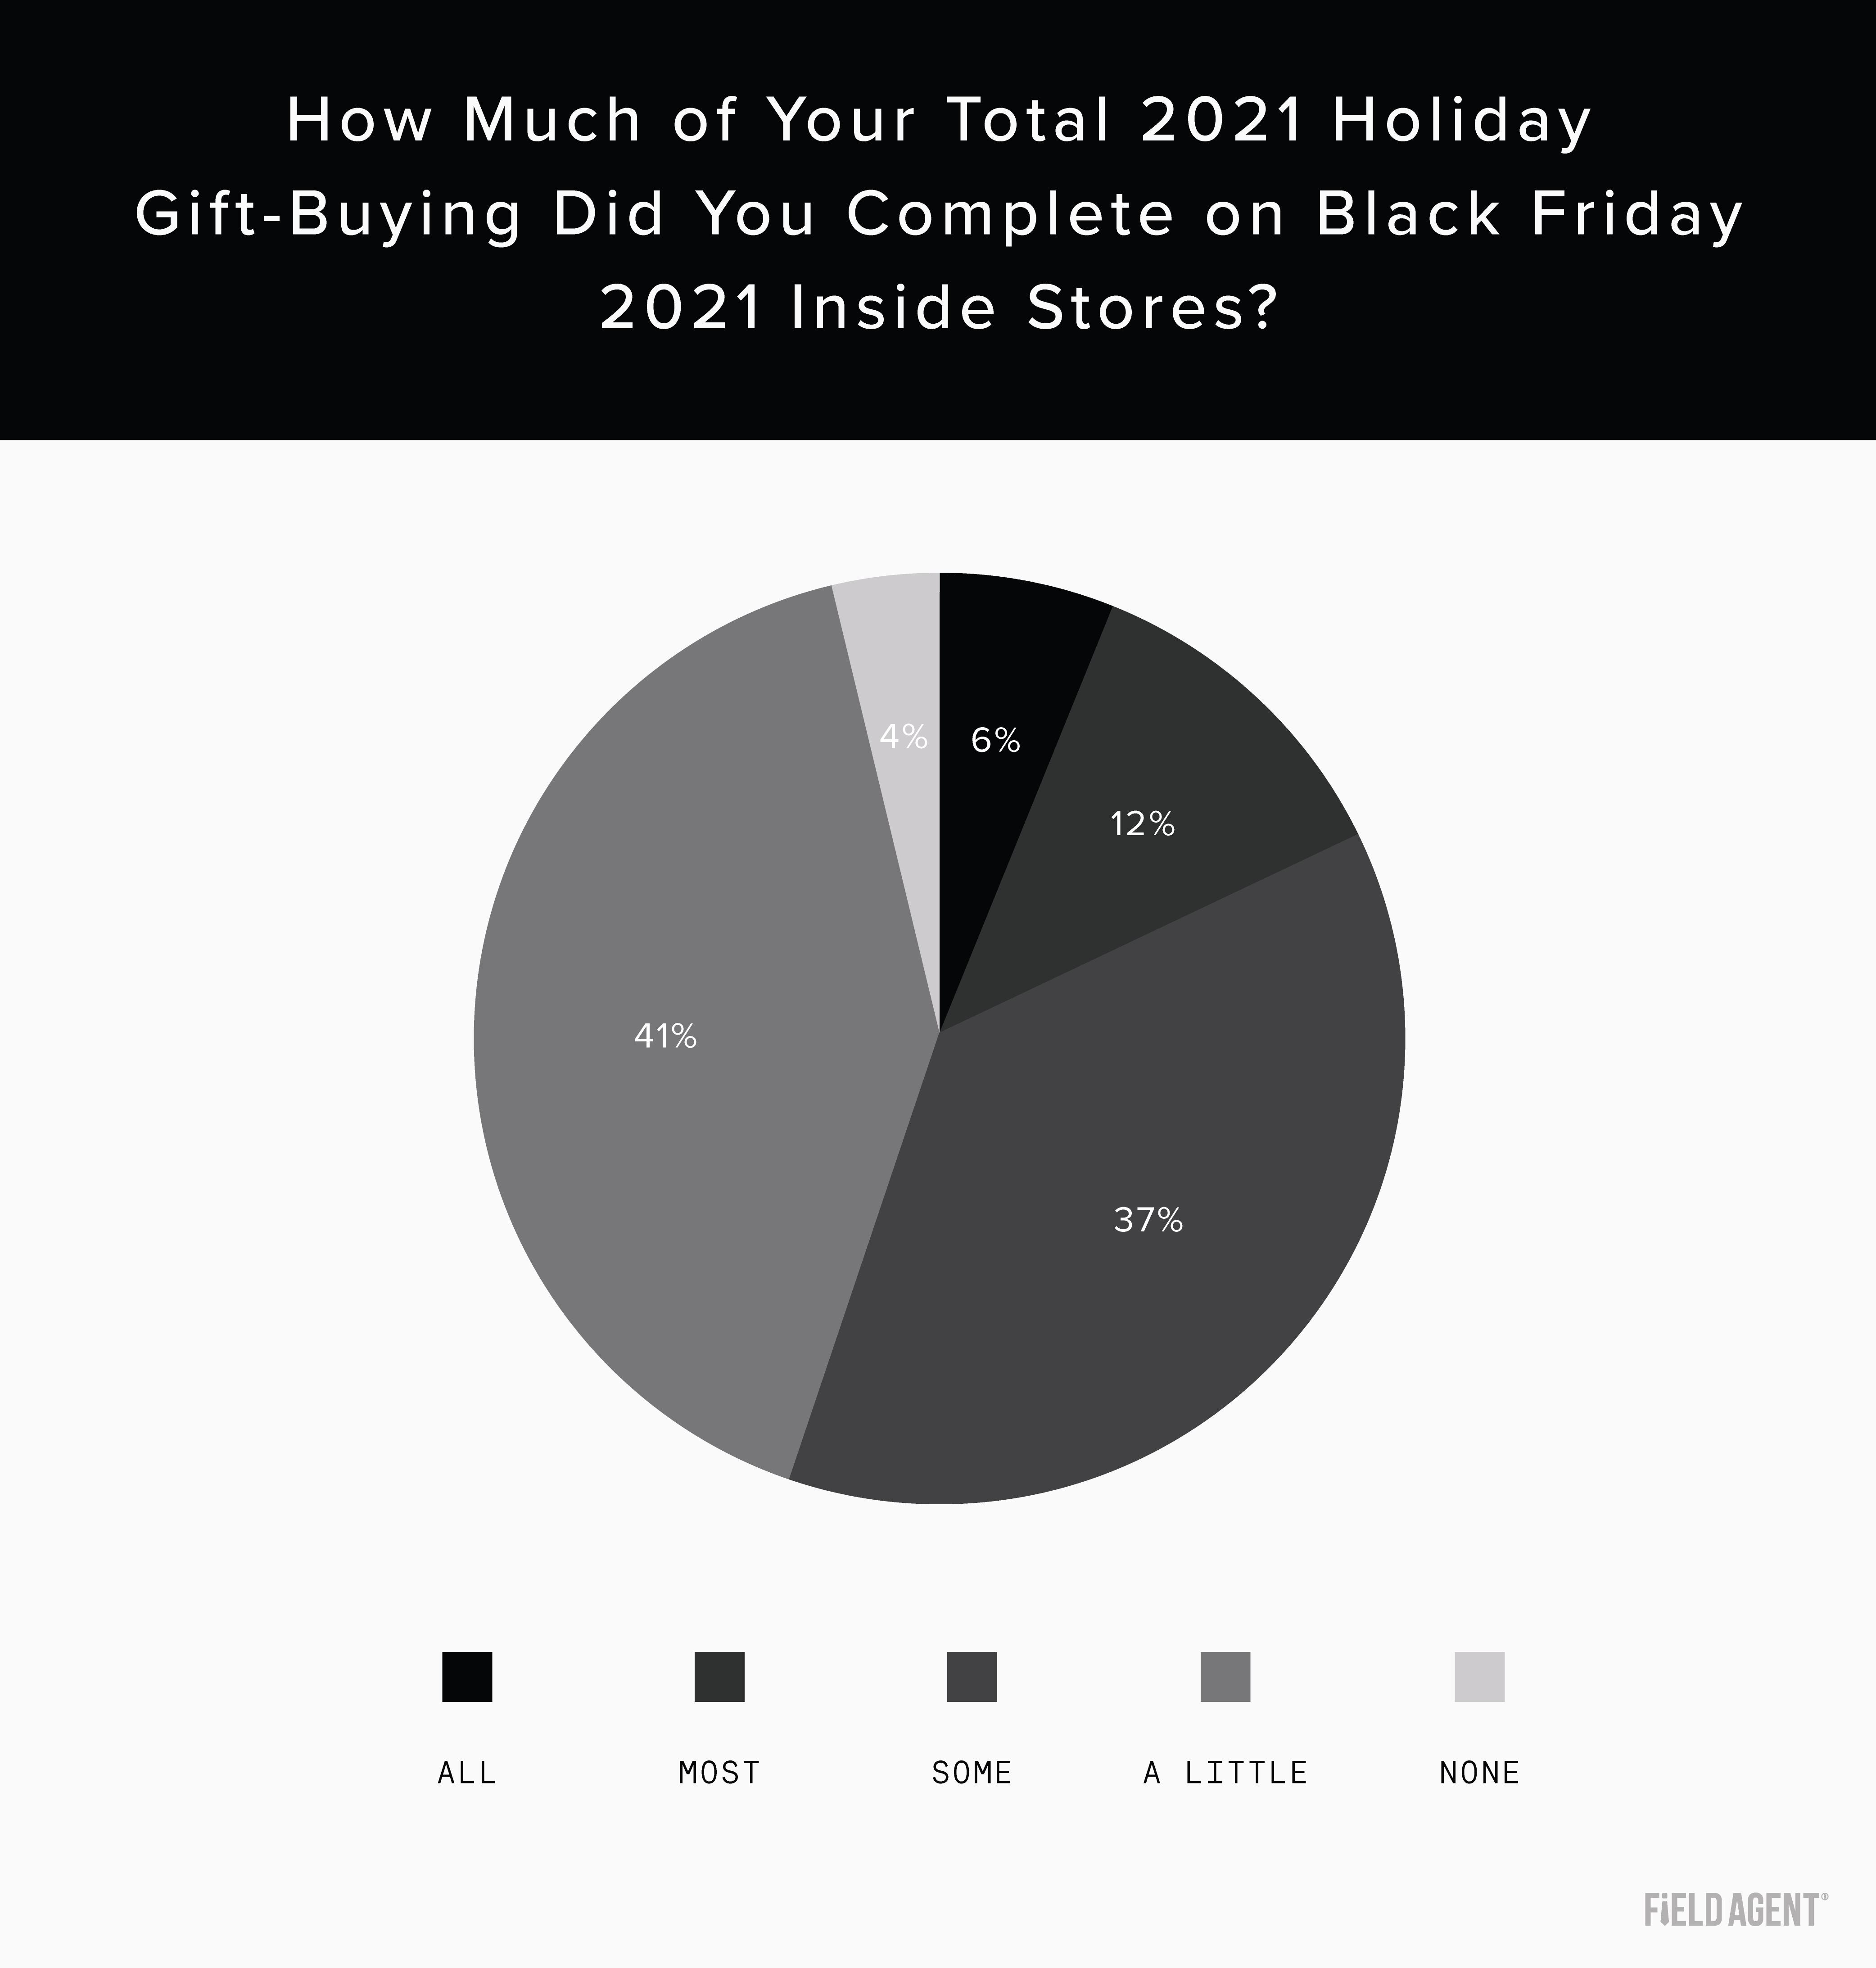 Graph showing how much of their total gift-buying shoppers did inside stores on Black Friday 2021